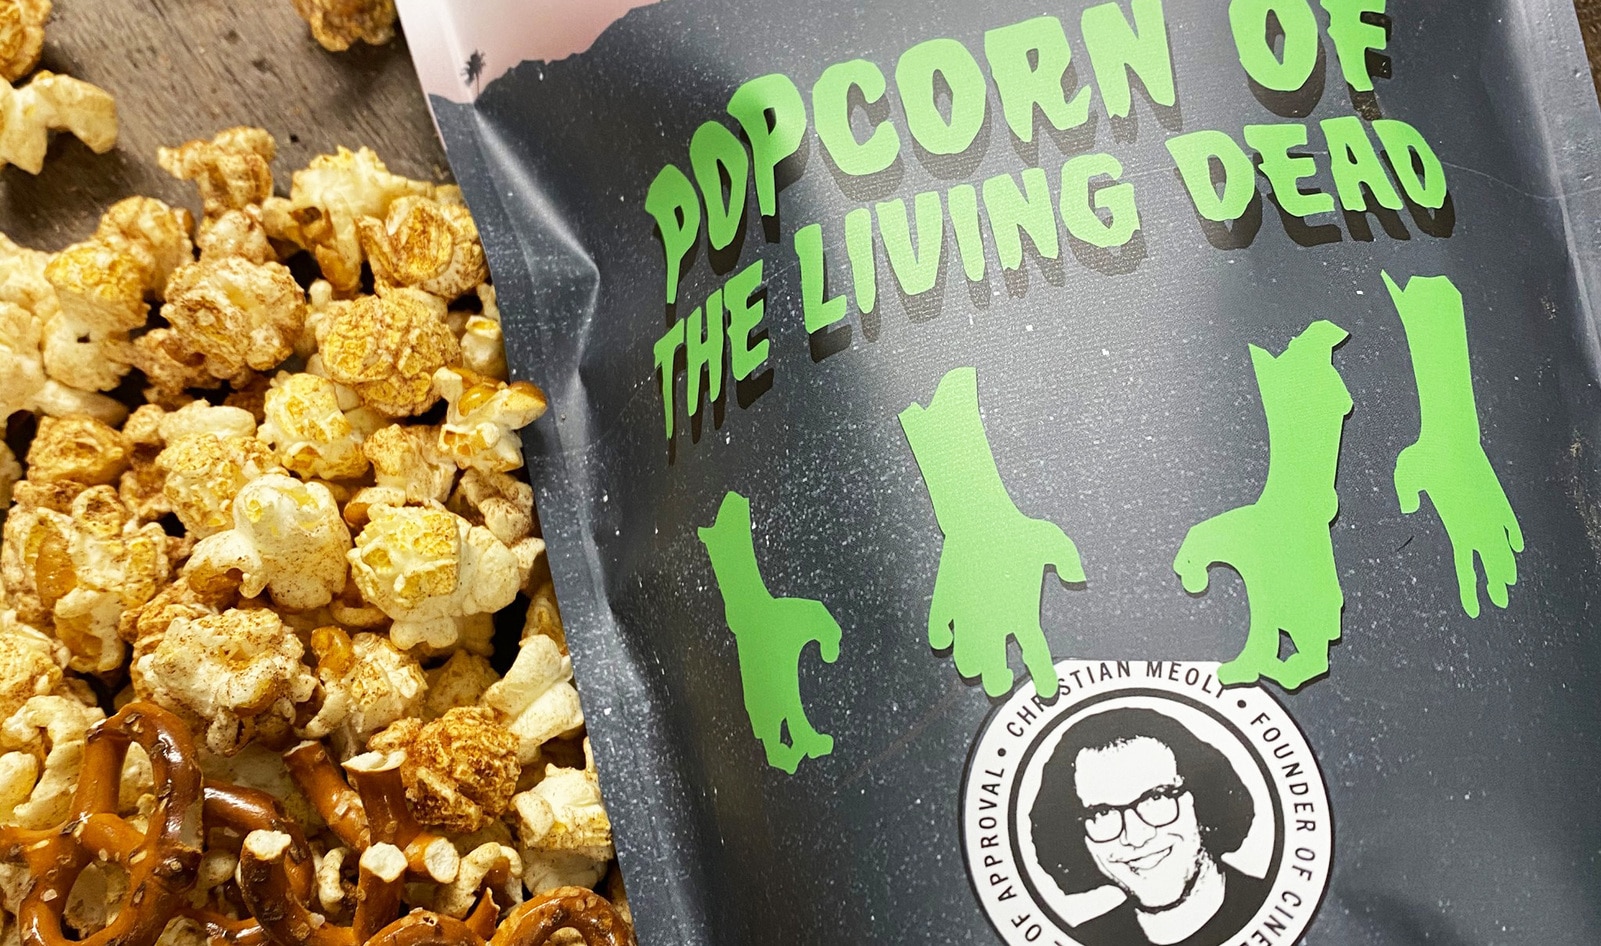 The First Movie Theater to Reopen in Los Angeles Will Serve Gourmet Vegan Popcorn Inspired by Classic Films